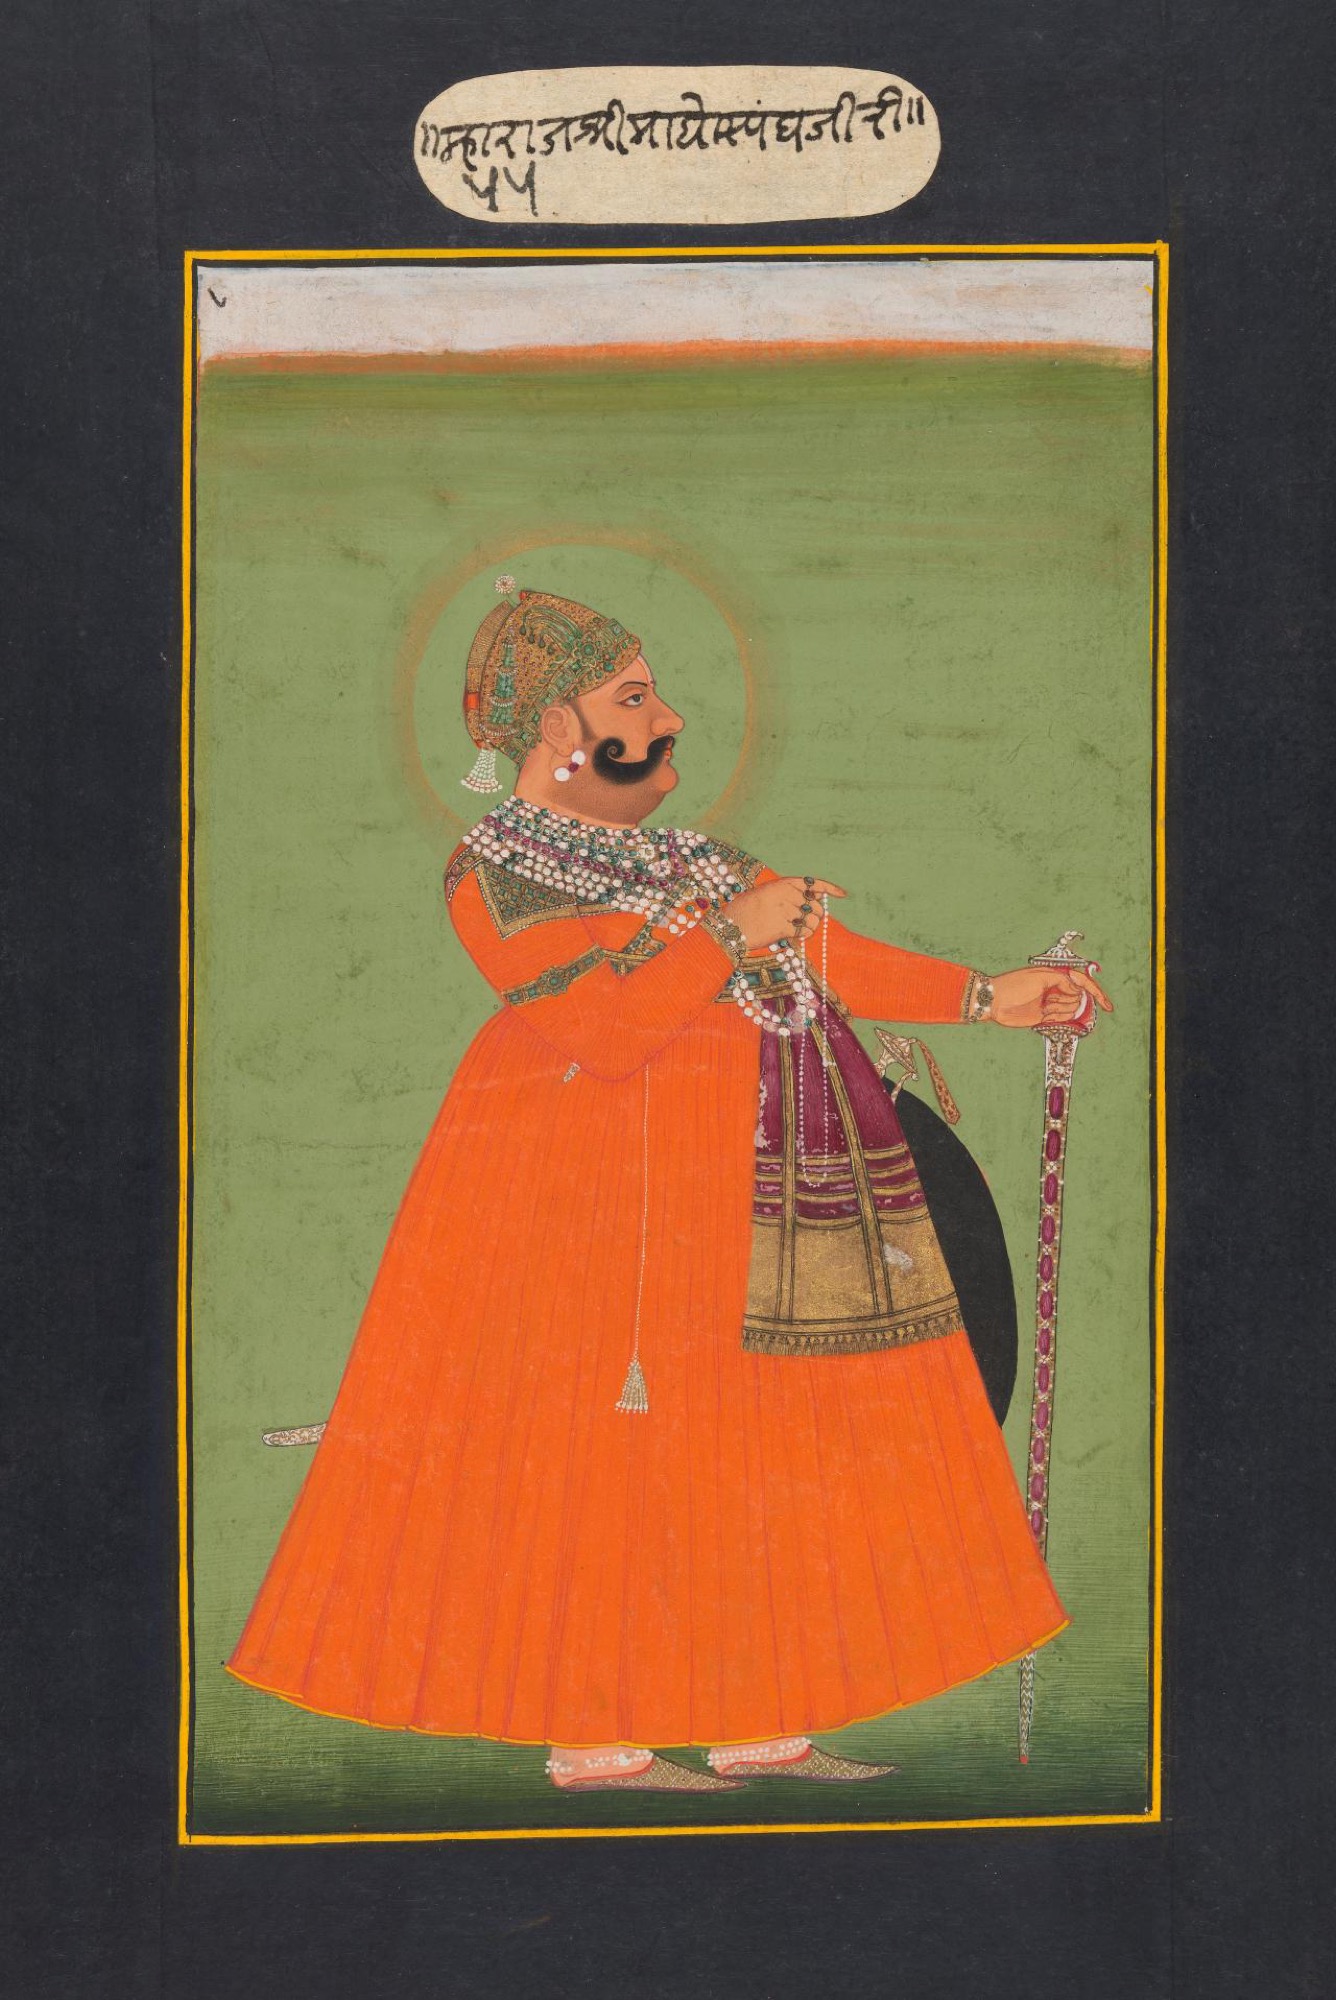 BAKHTA (manner of), <em>Maharaja Madho Singh I of Jaipur,</em> c. 1760, opaque watercolour and gold paint on paper, 21.0 × 13.0 cm (image) 29.8 × 21.2 cm (sheet)